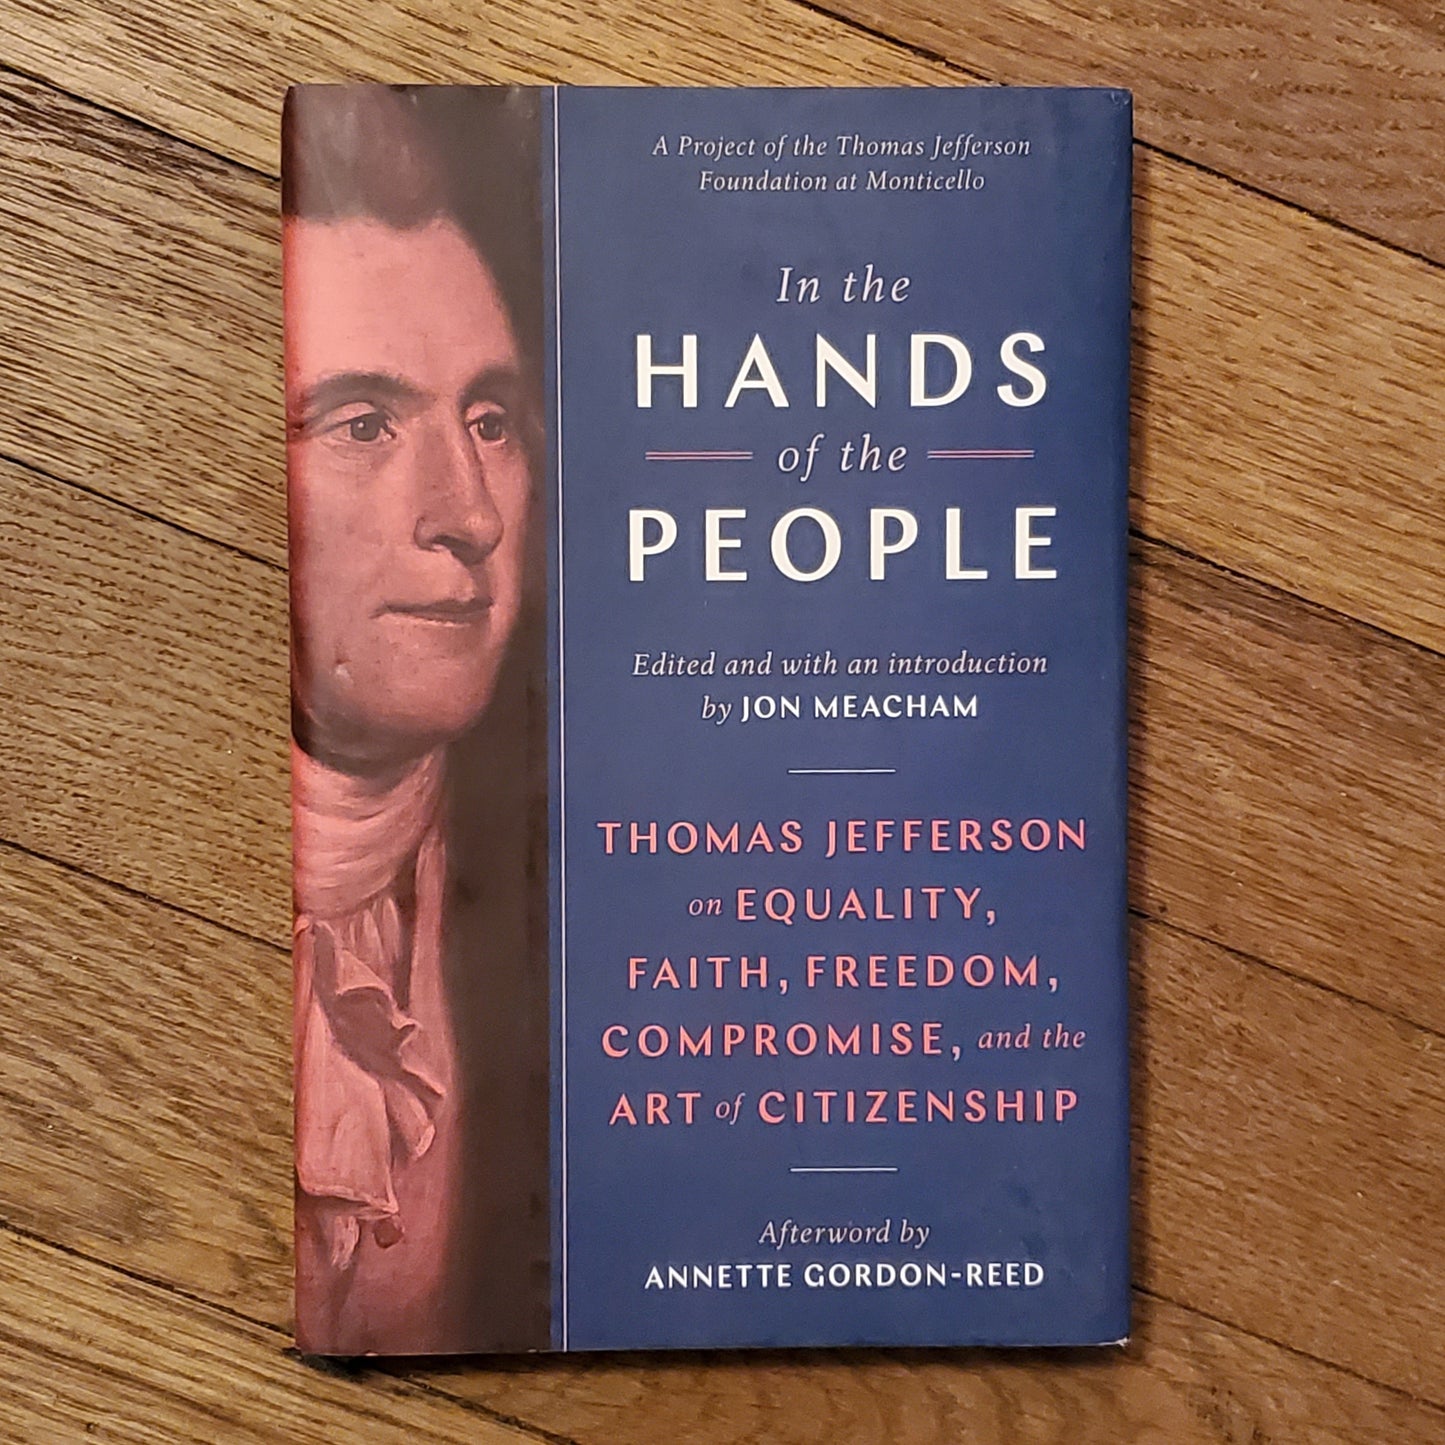 GB In the Hands of the People: Thomas Jefferson on Equality, Faith, Freedom, Compromise, and the Art of Citizenship